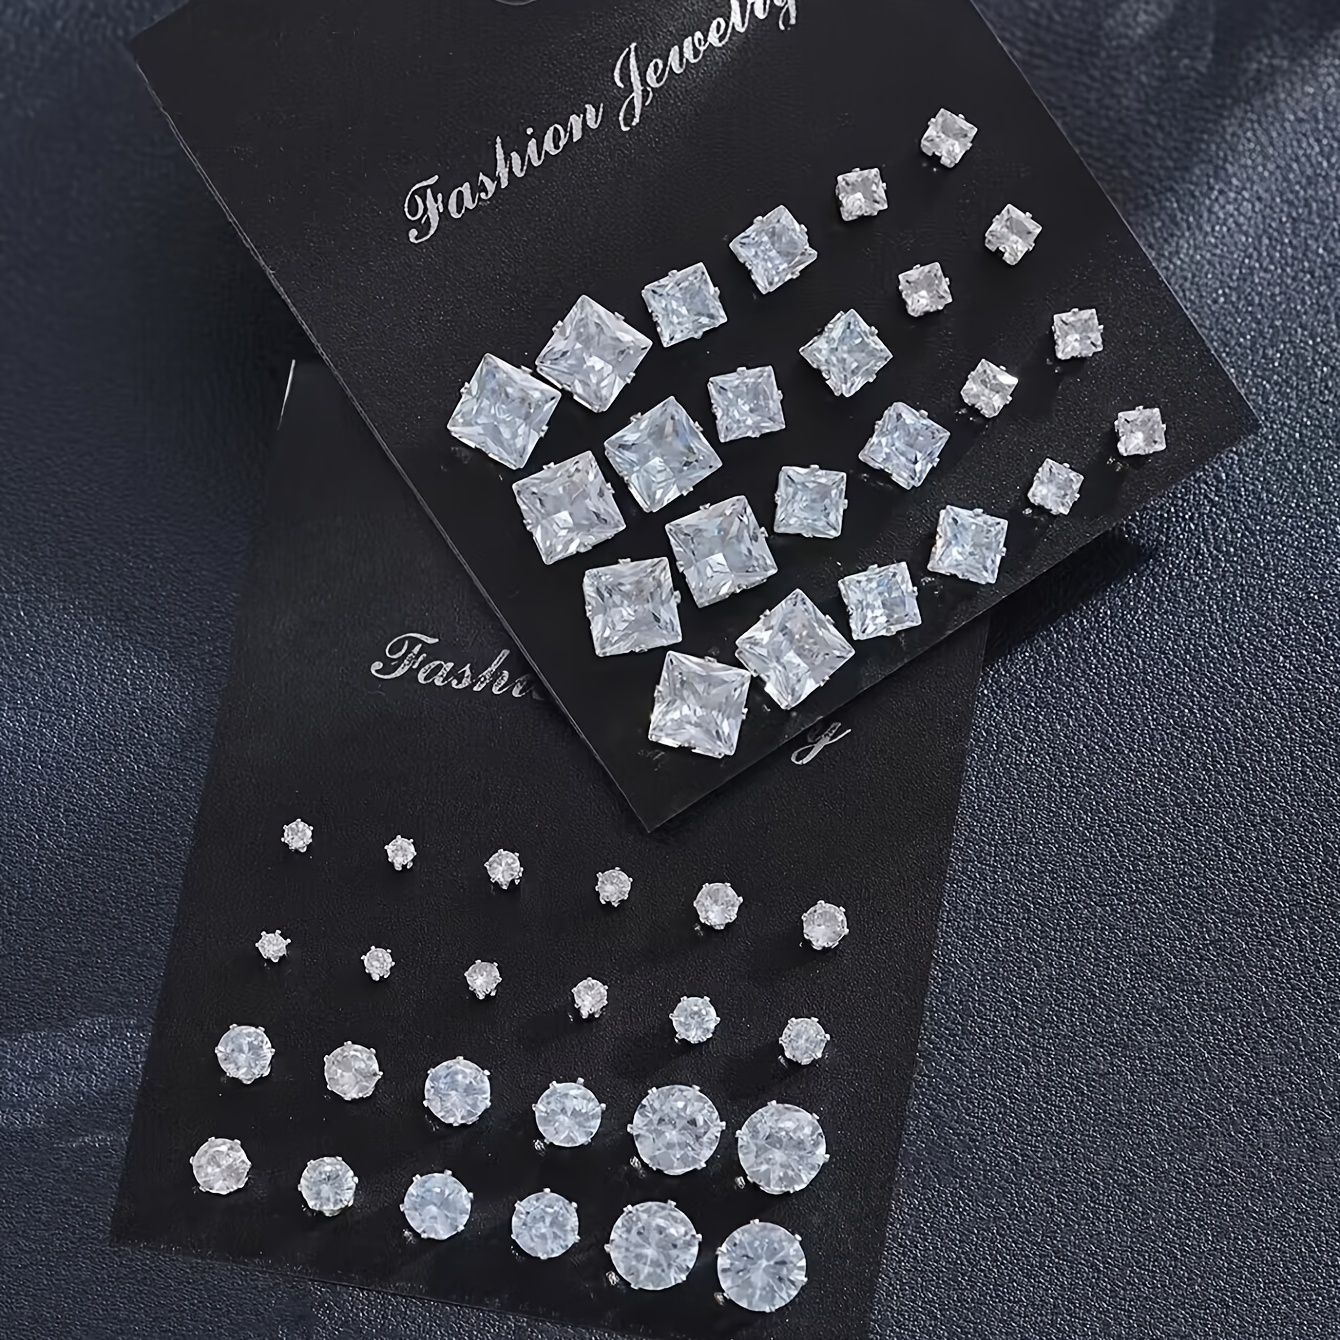 

48-piece Unisex Fashion Earring Collection - Sparkling Zirconia In Square & Circular Styles - Ideal For Parties, Dates, And Daily Use